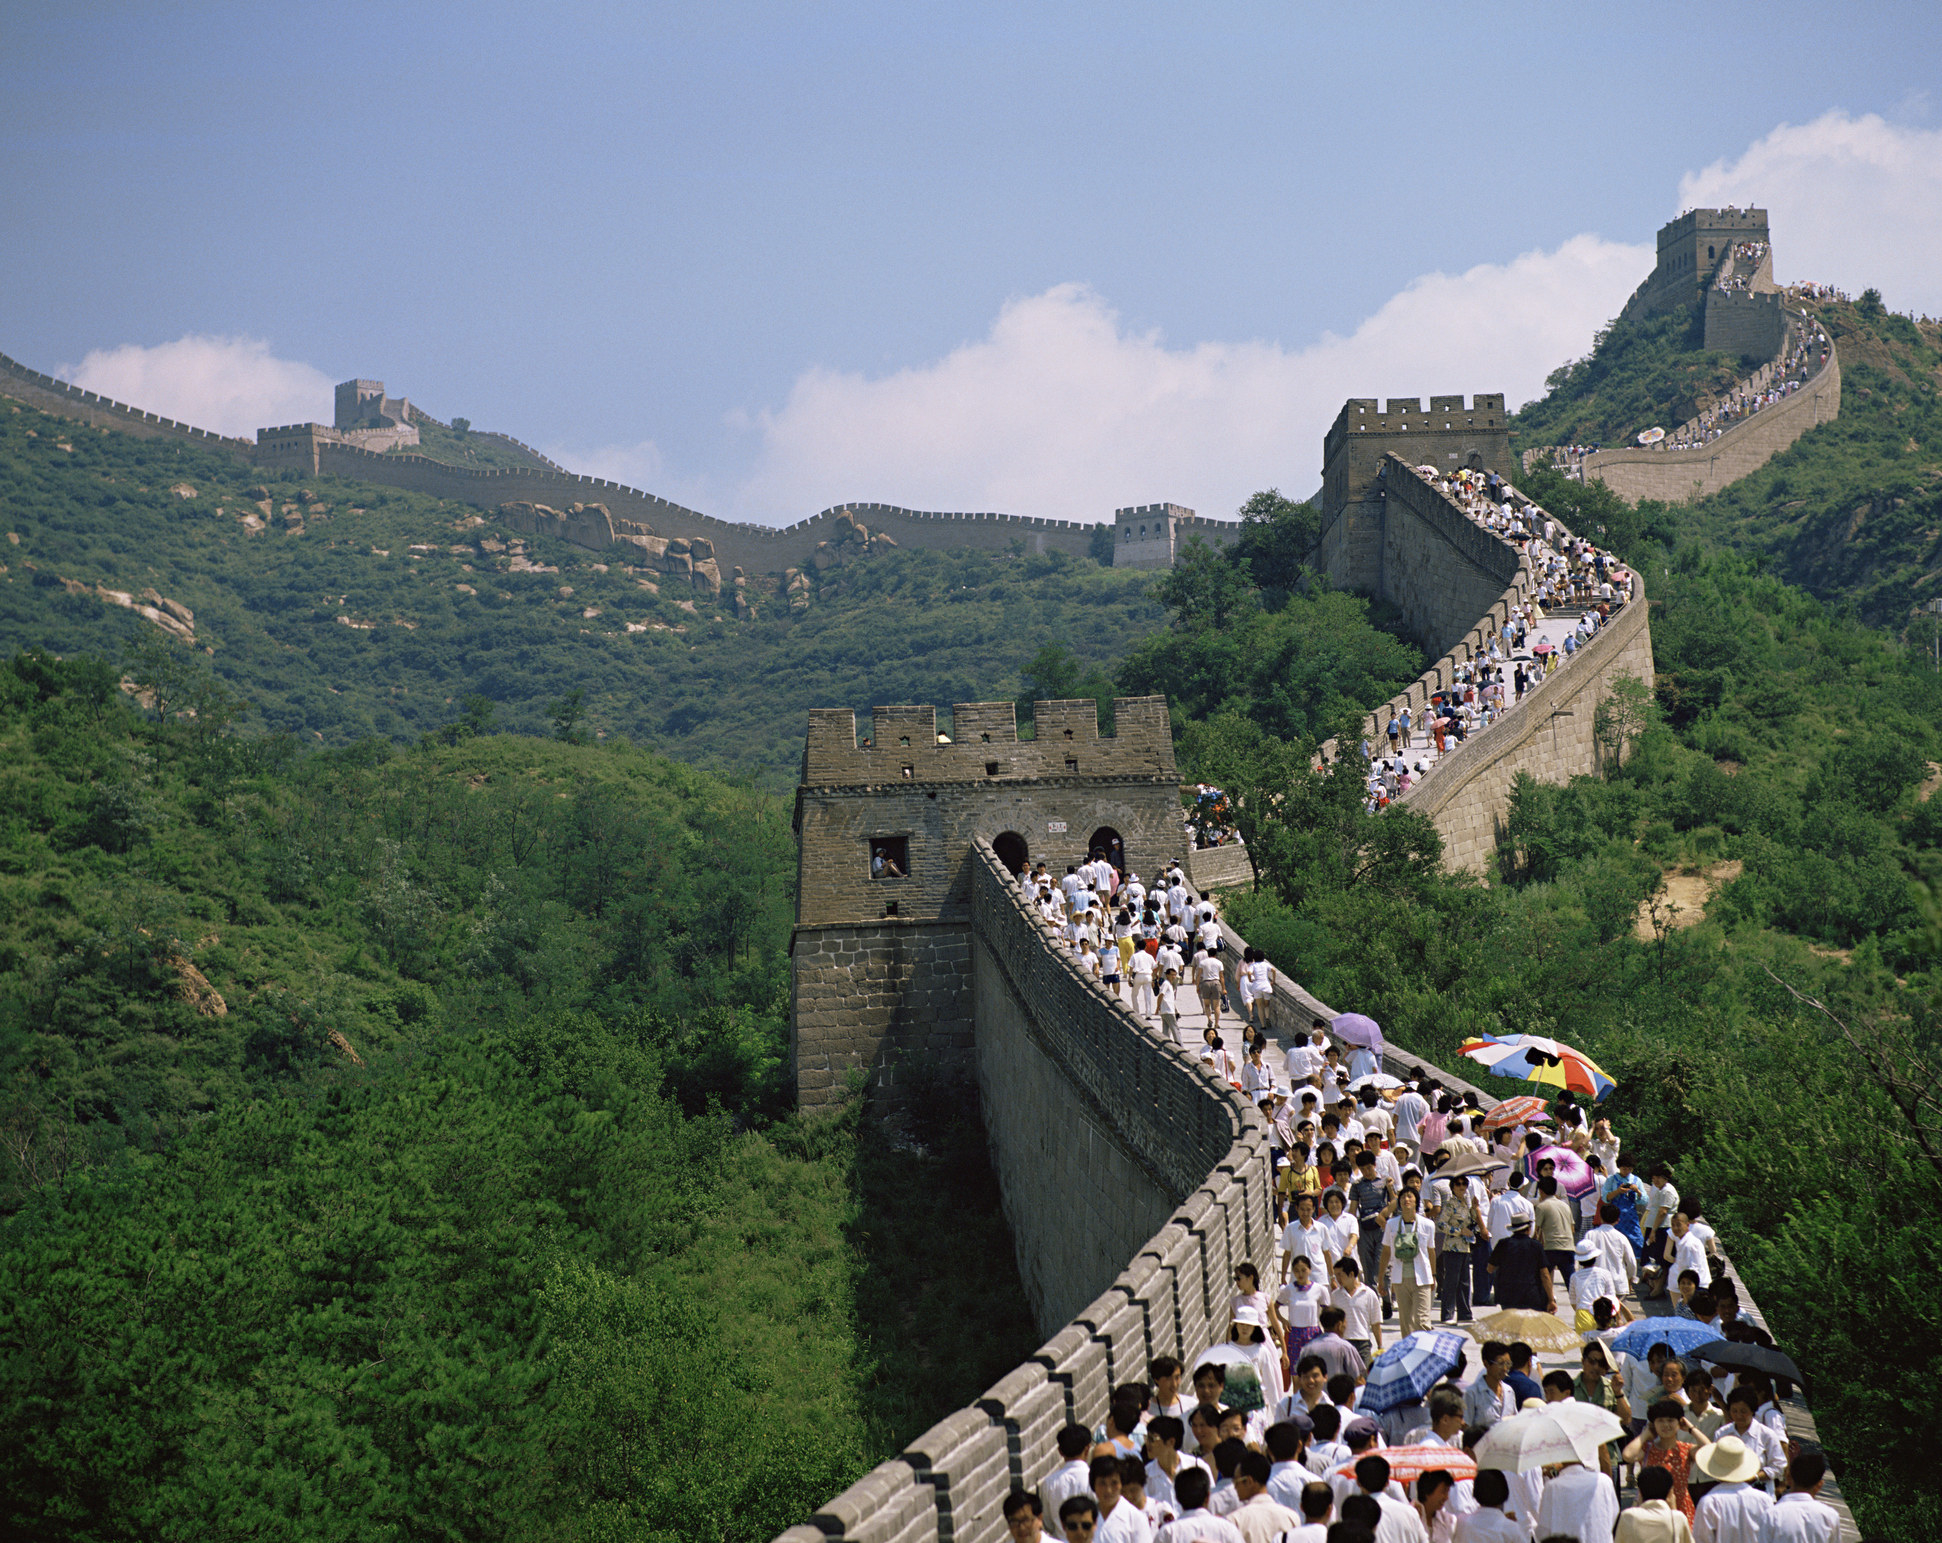 A crowd on the Great Wall of China